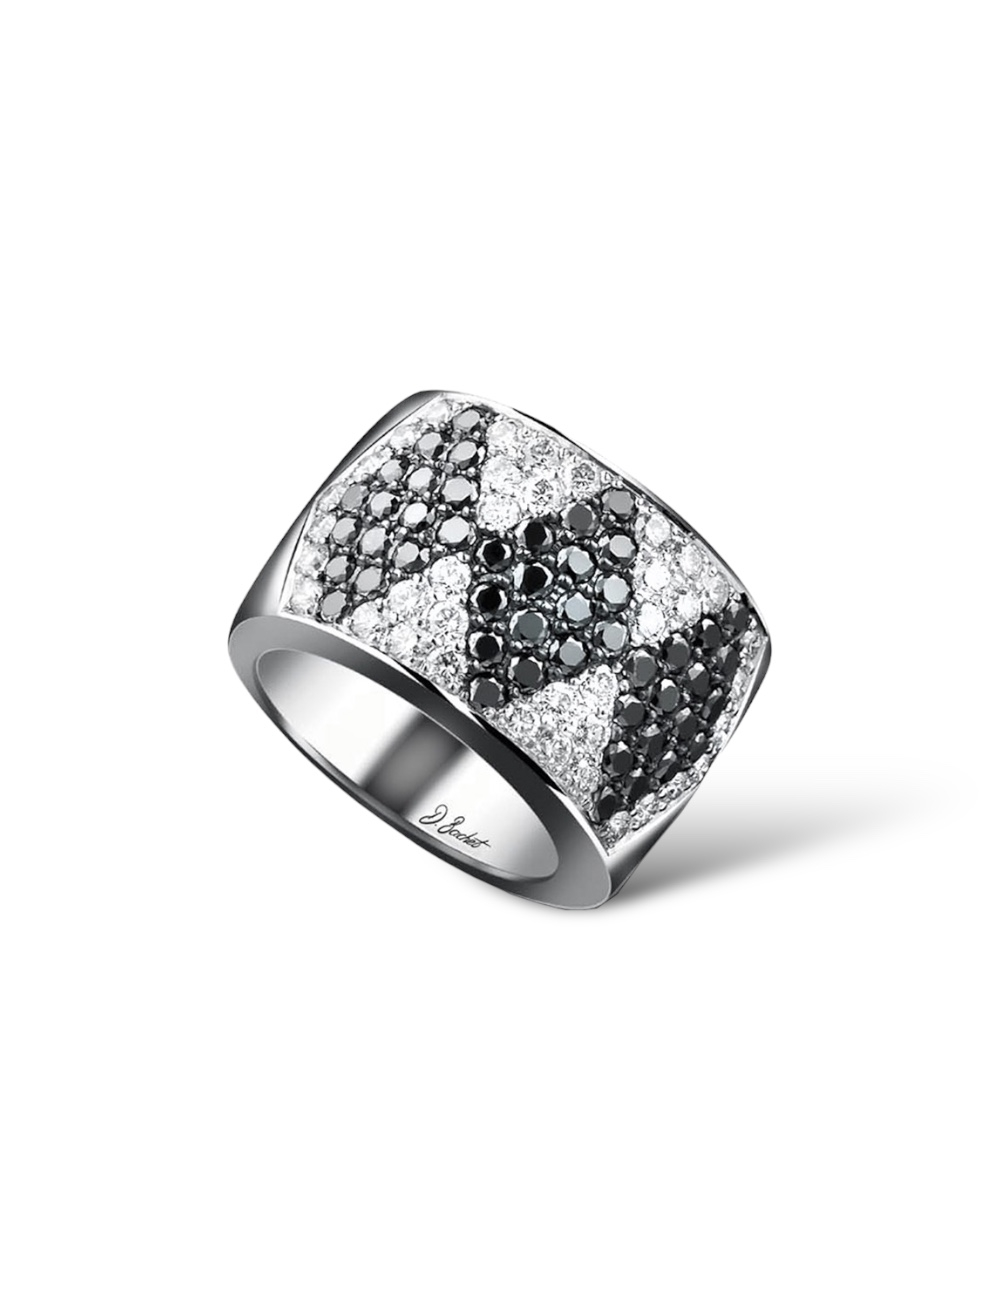 Platinum Ring Paved with Black and White Diamonds - Symbol of Elegance and Powerful Contrasts.